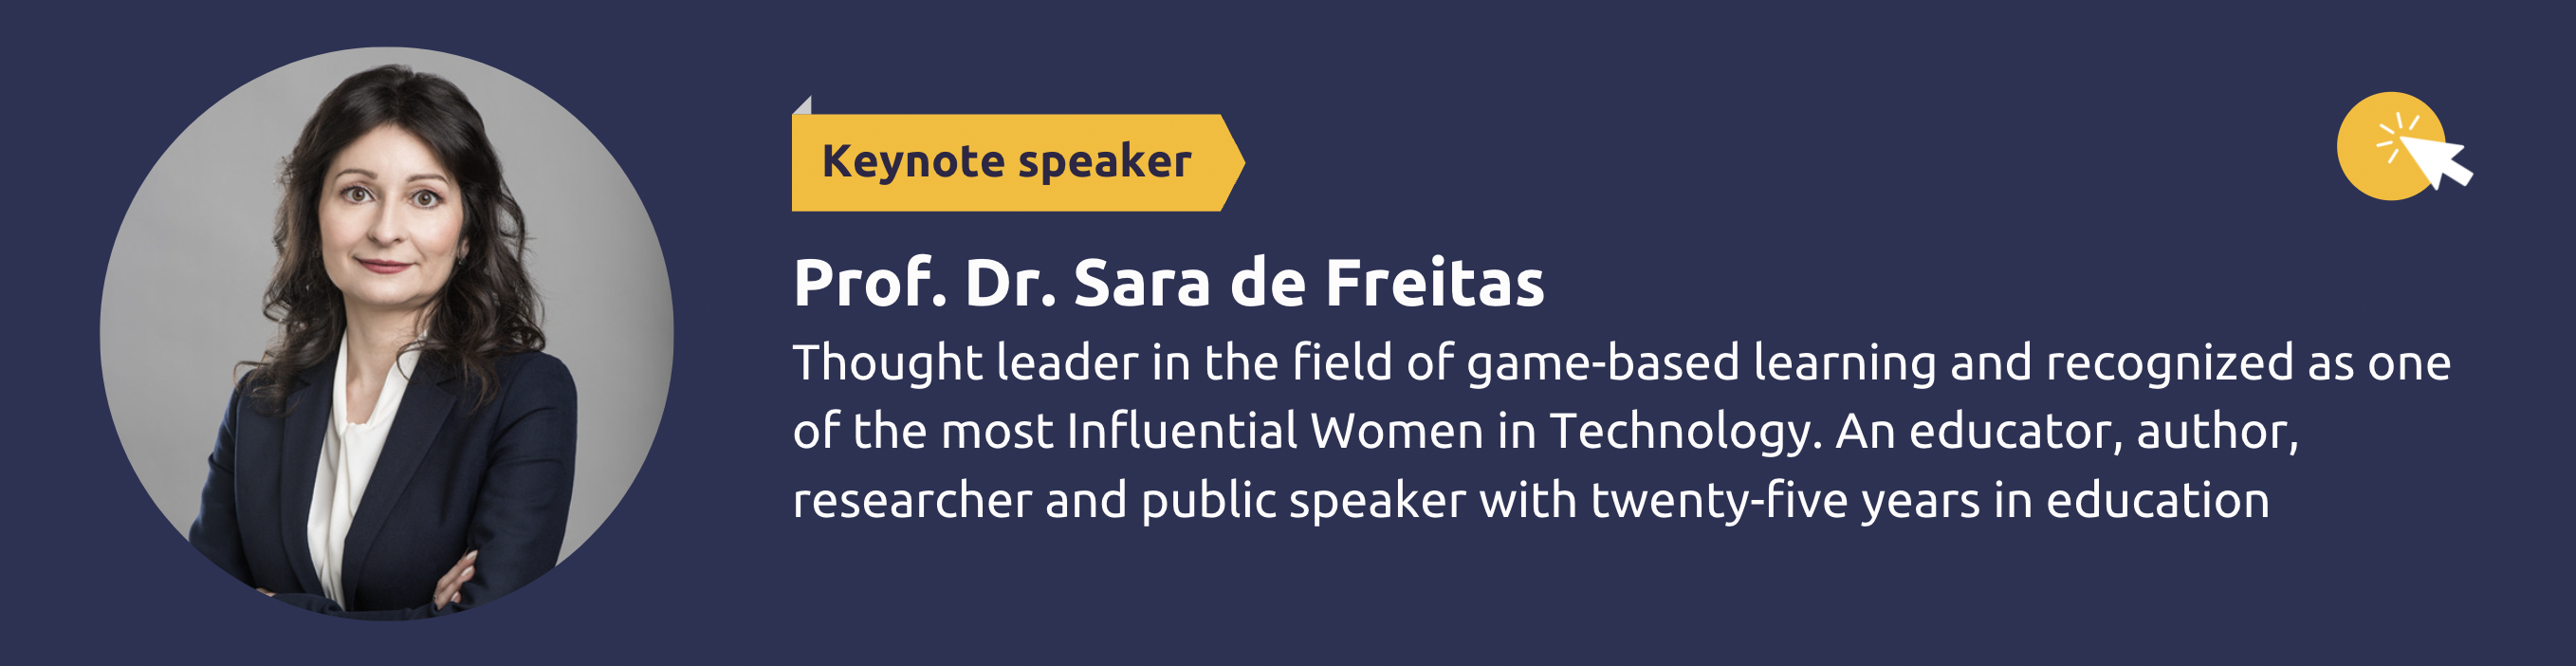 Prof. Dr. Sara de Freitas is a thought leader in the field of game-based learning and recognized as one of the most Influential Women in Technology. An educator, author, researcher and public speaker with twenty-five years in education